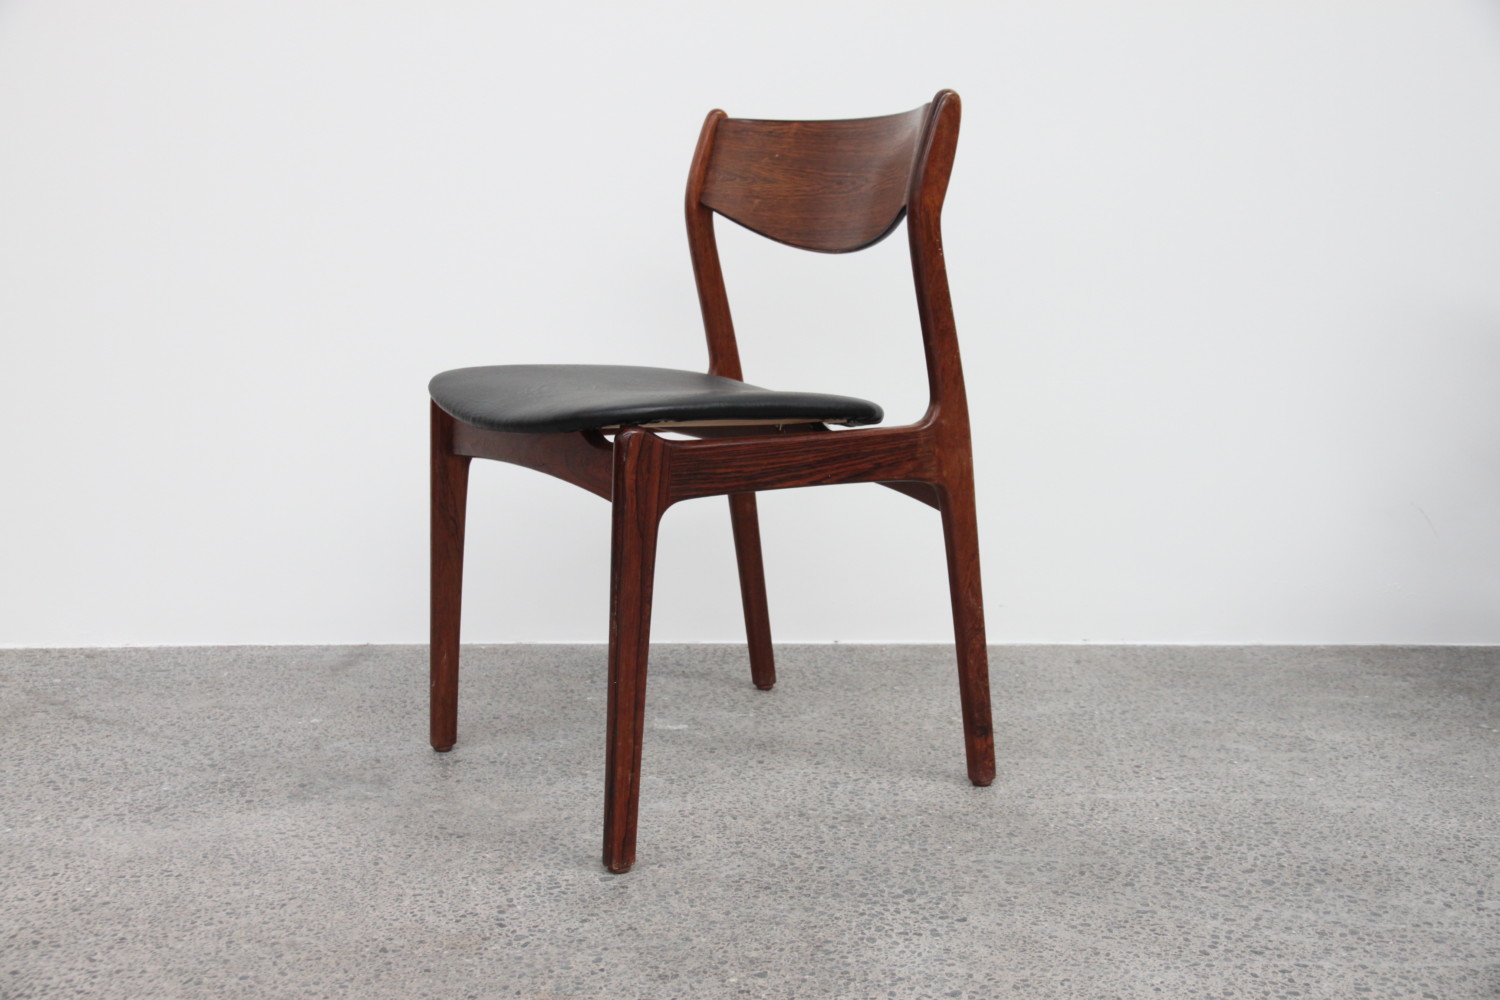 Dining chairs by P.E Jorgensen